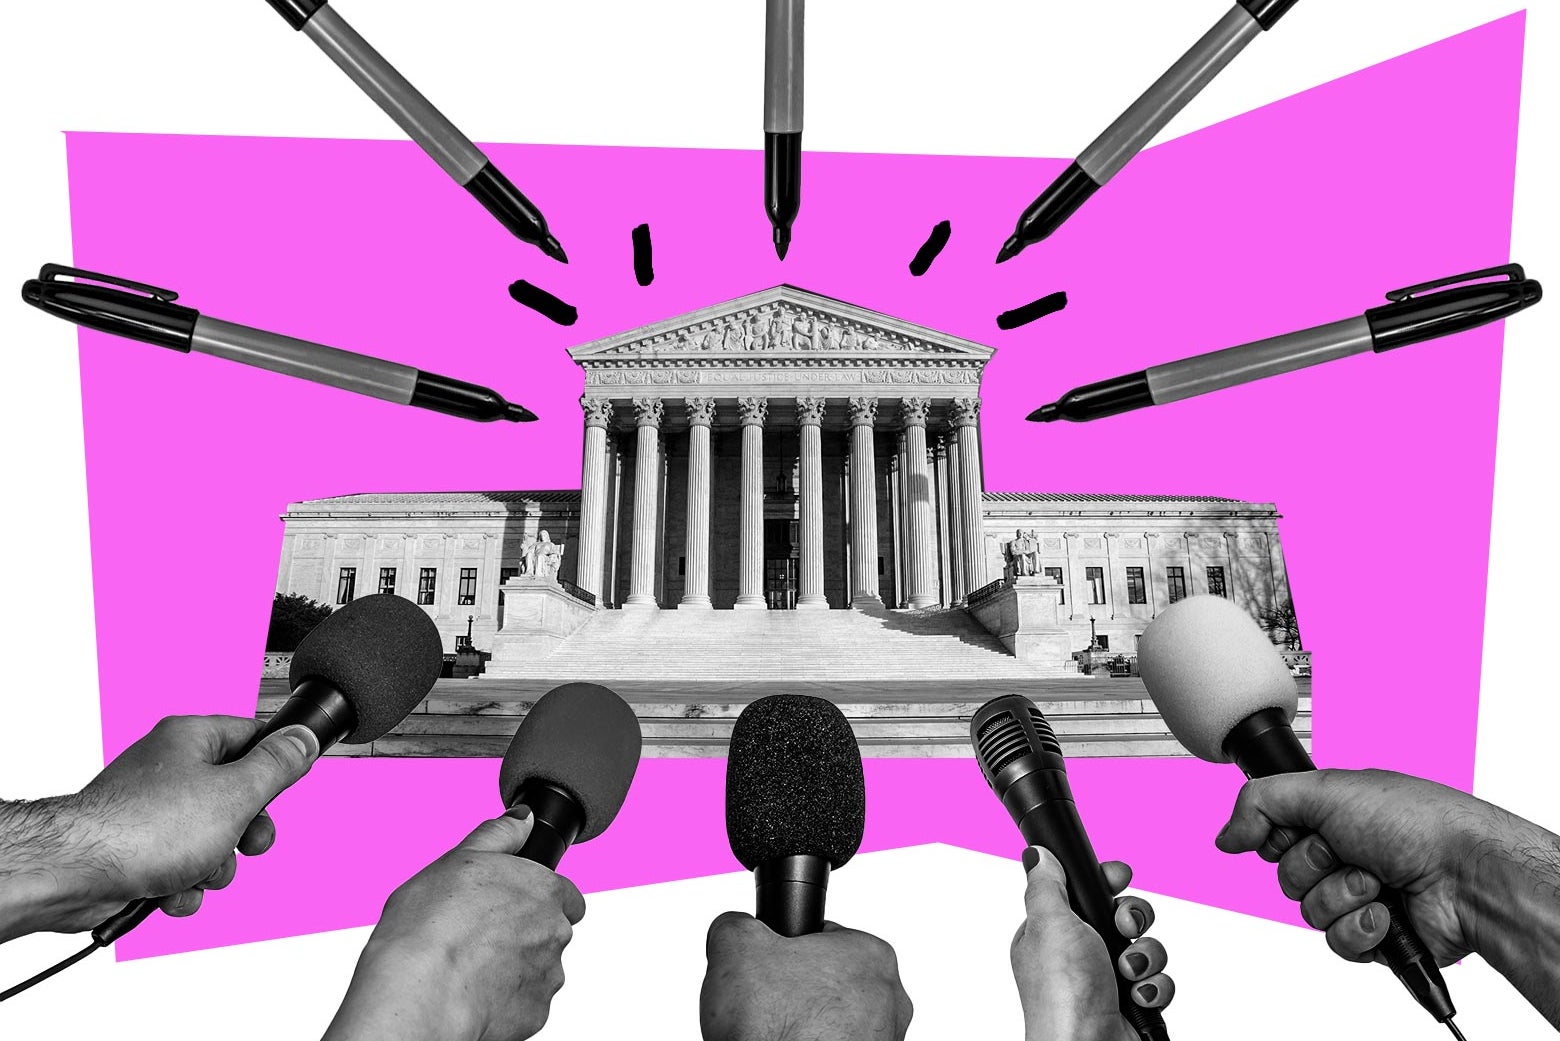 The exterior of the U.S. Supreme Court, with a row of reporters' hands holding microphones toward the building, and several Sharpies drawing lines around the top.